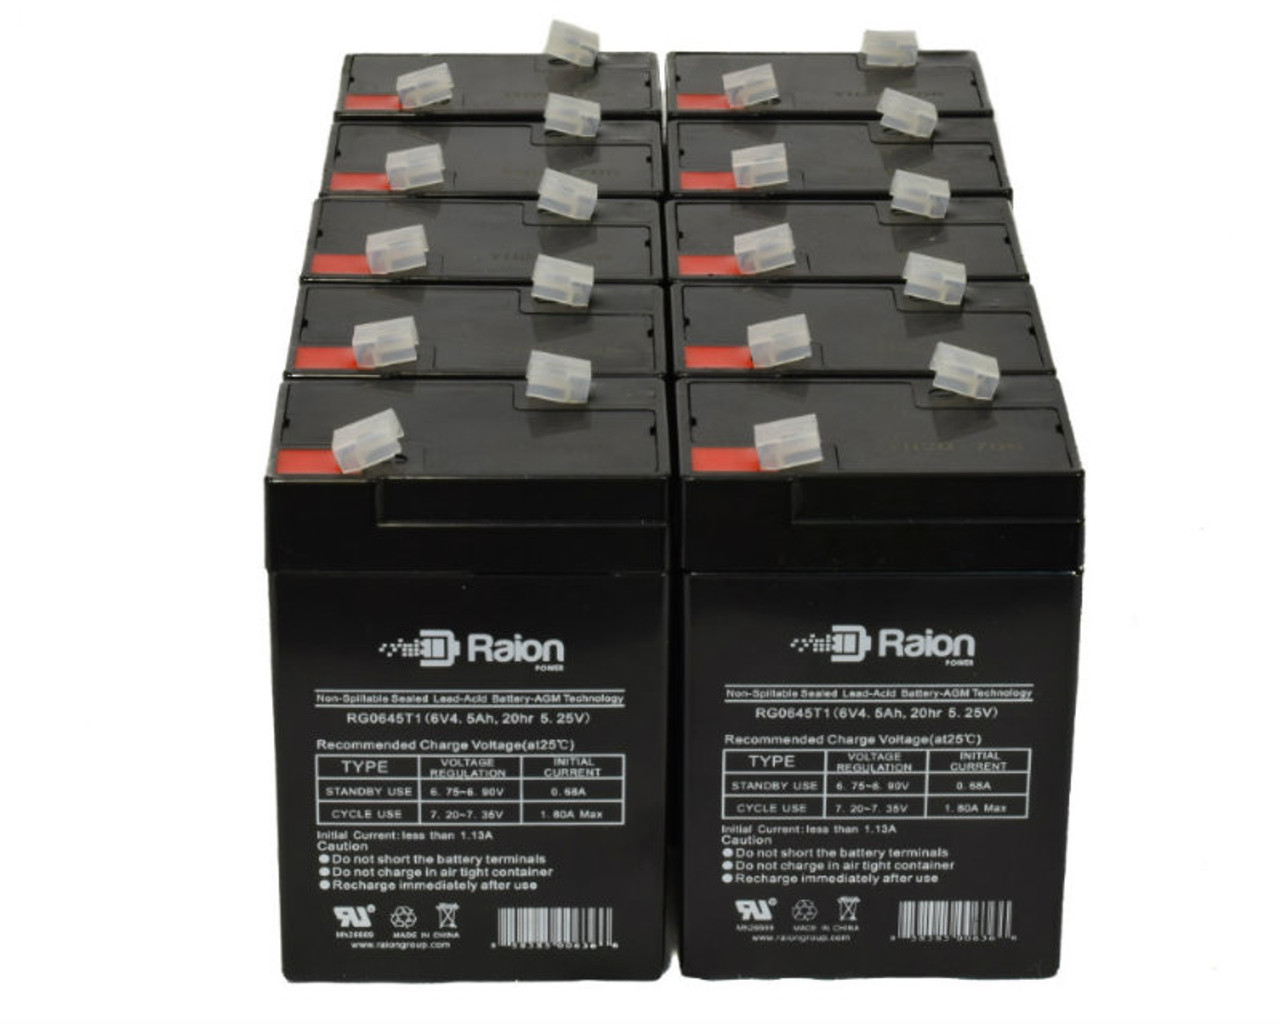 Raion Power RG0645T1 6V 4.5Ah Replacement Medical Equipment Battery for Cambridge Med Instruments Model 502 - 10 Pack